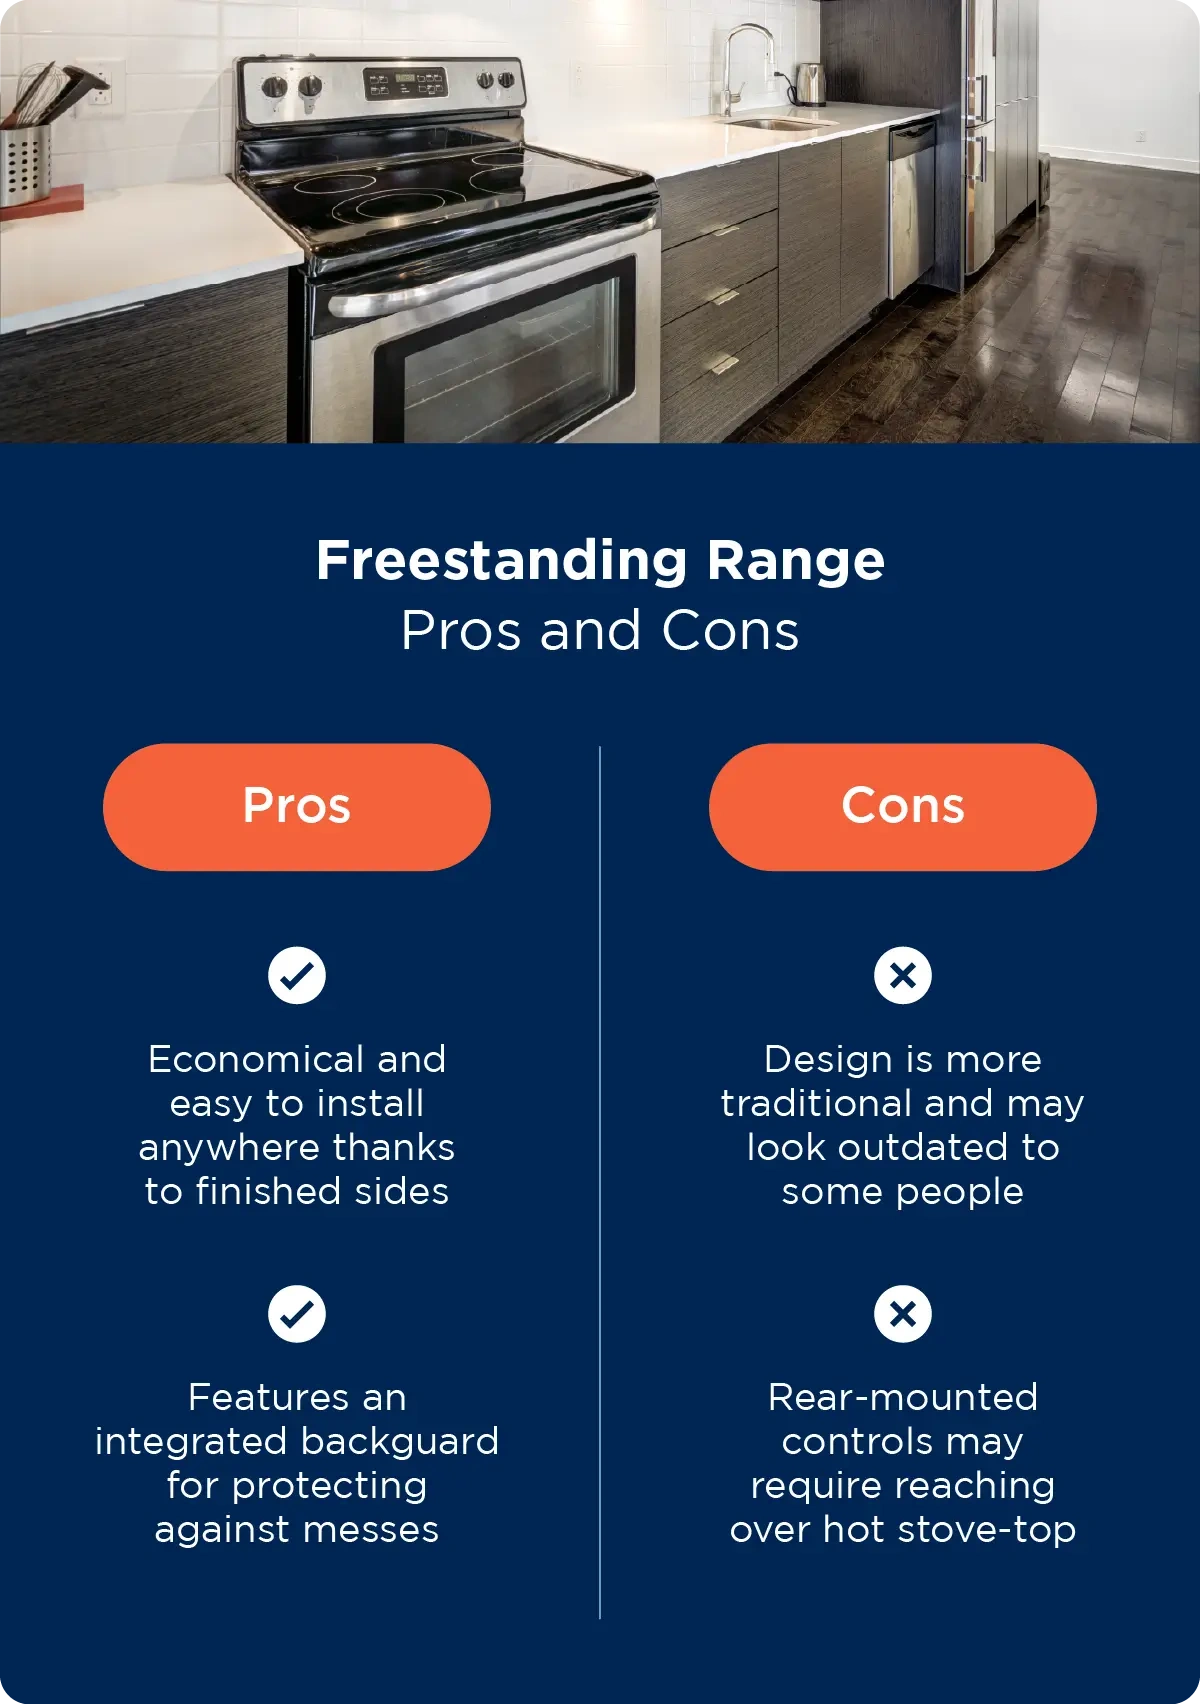 Pros and cons of a freestanding range | freestanding-range-pros-cons.